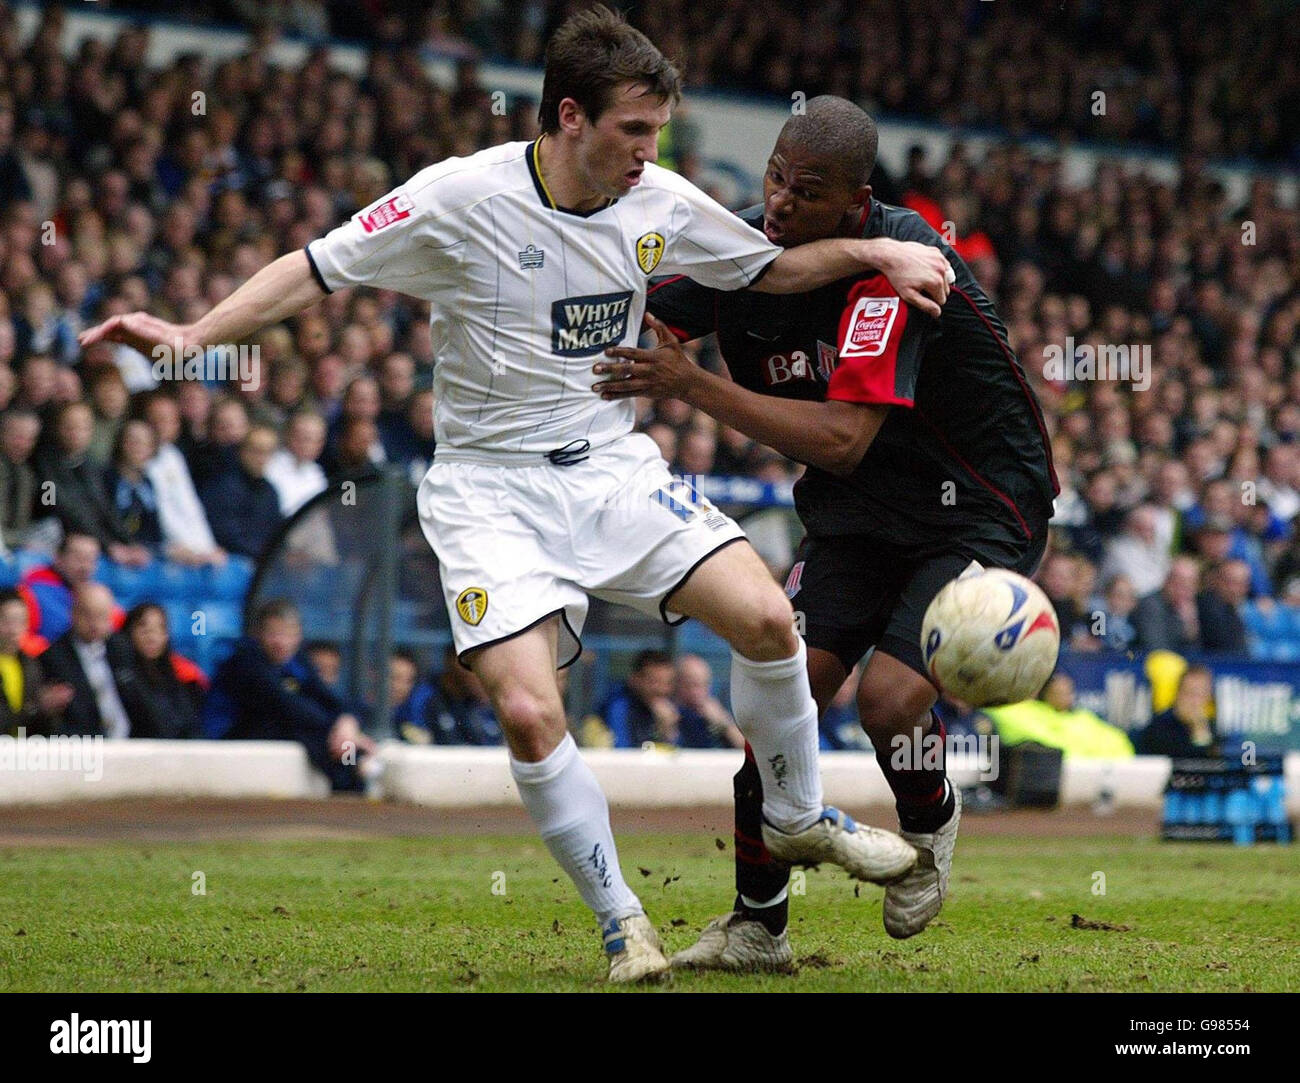 Leeds United's Liam Miller (L) is challenged by Stoke City's Gabriel Ngalula Mbuyi during the Coca-Cola Championship match at Elland Road, Leeds, Saturday March 25, 2006. PRESS ASSOCIATION Photo. Photo credit should read: Nigel Roddis/PA. NO UNOFFICIAL CLUB WEBSITE USE. Stock Photo